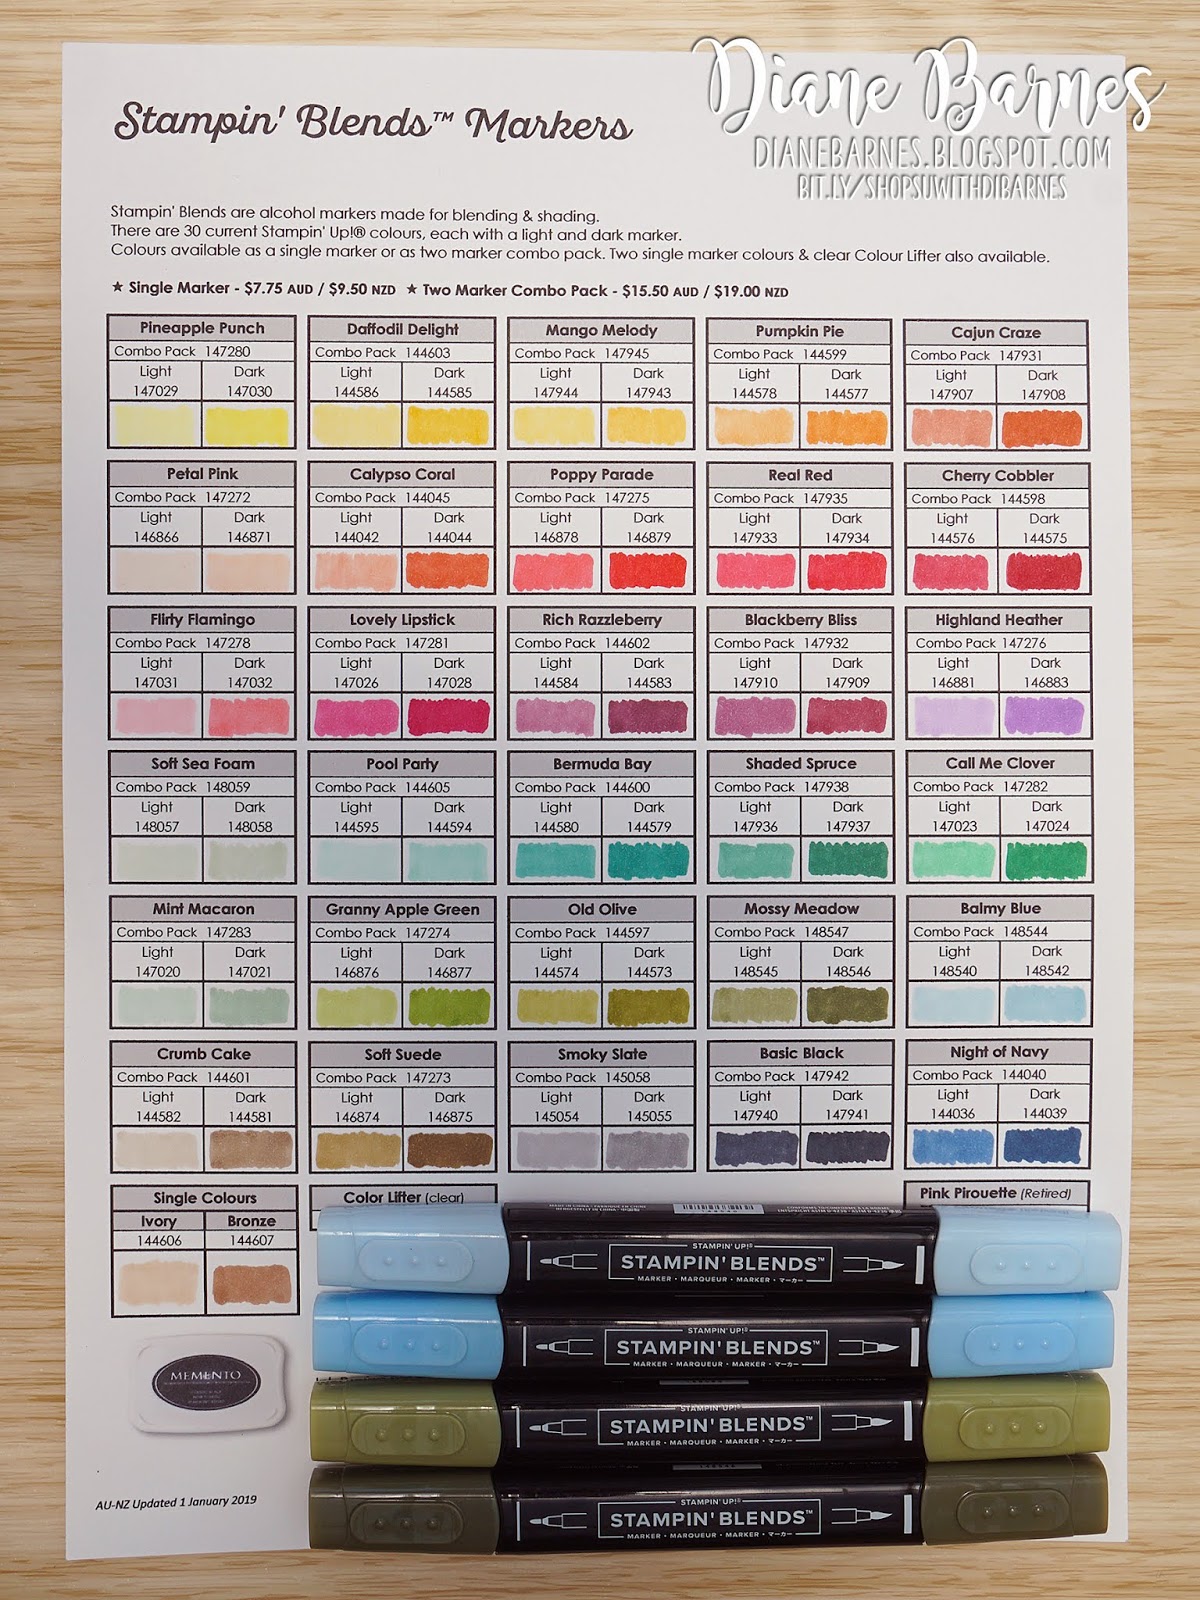 colour me happy: New Stampin Blends colours & chart update